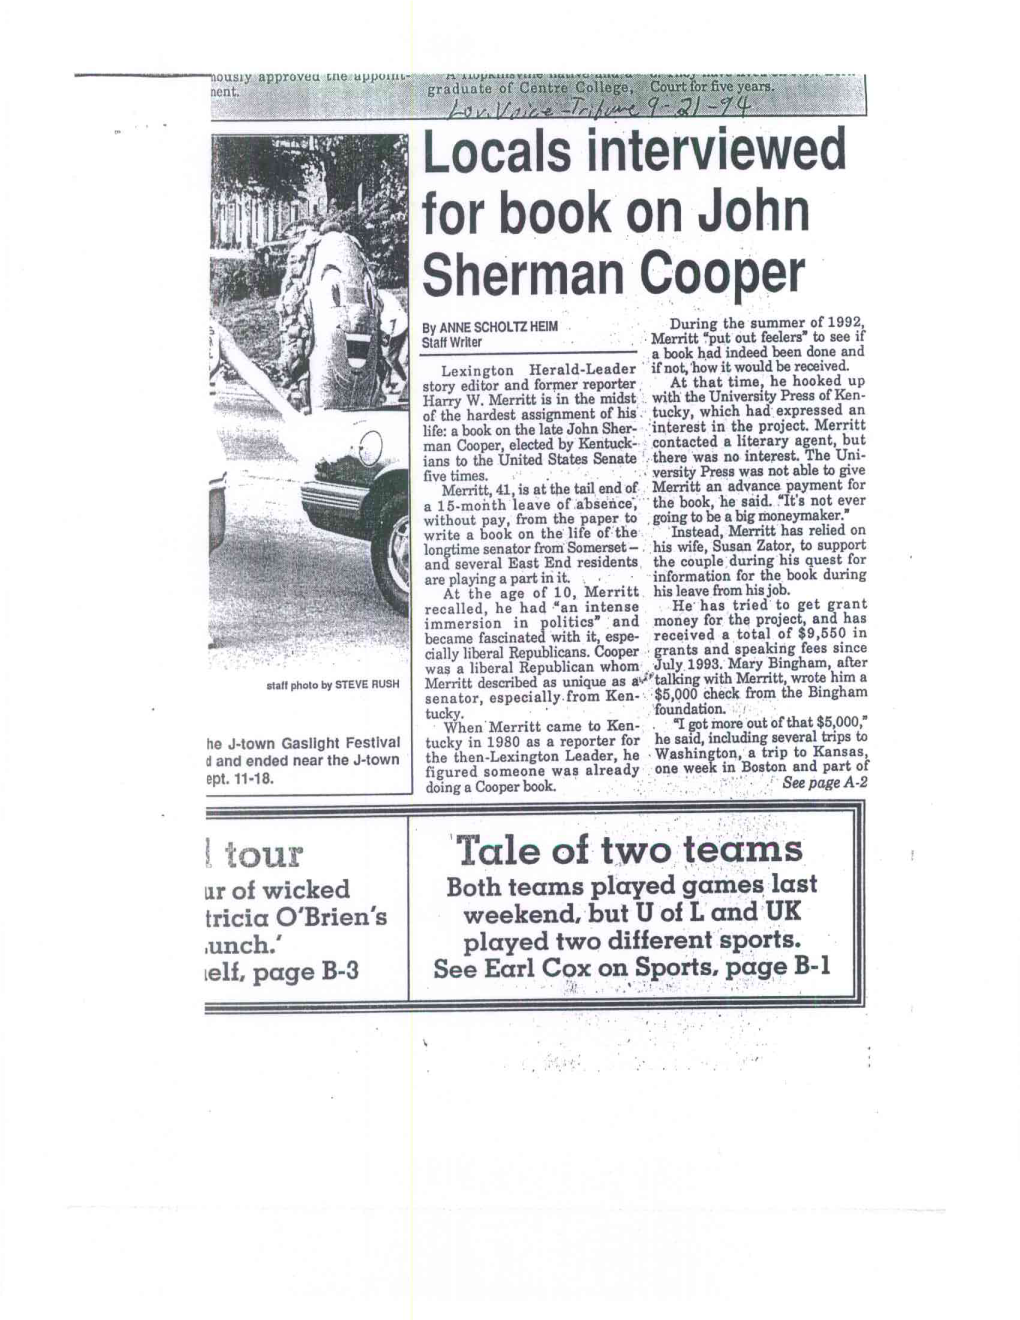 Locals Interviewed for Book on John Sherman Cooper